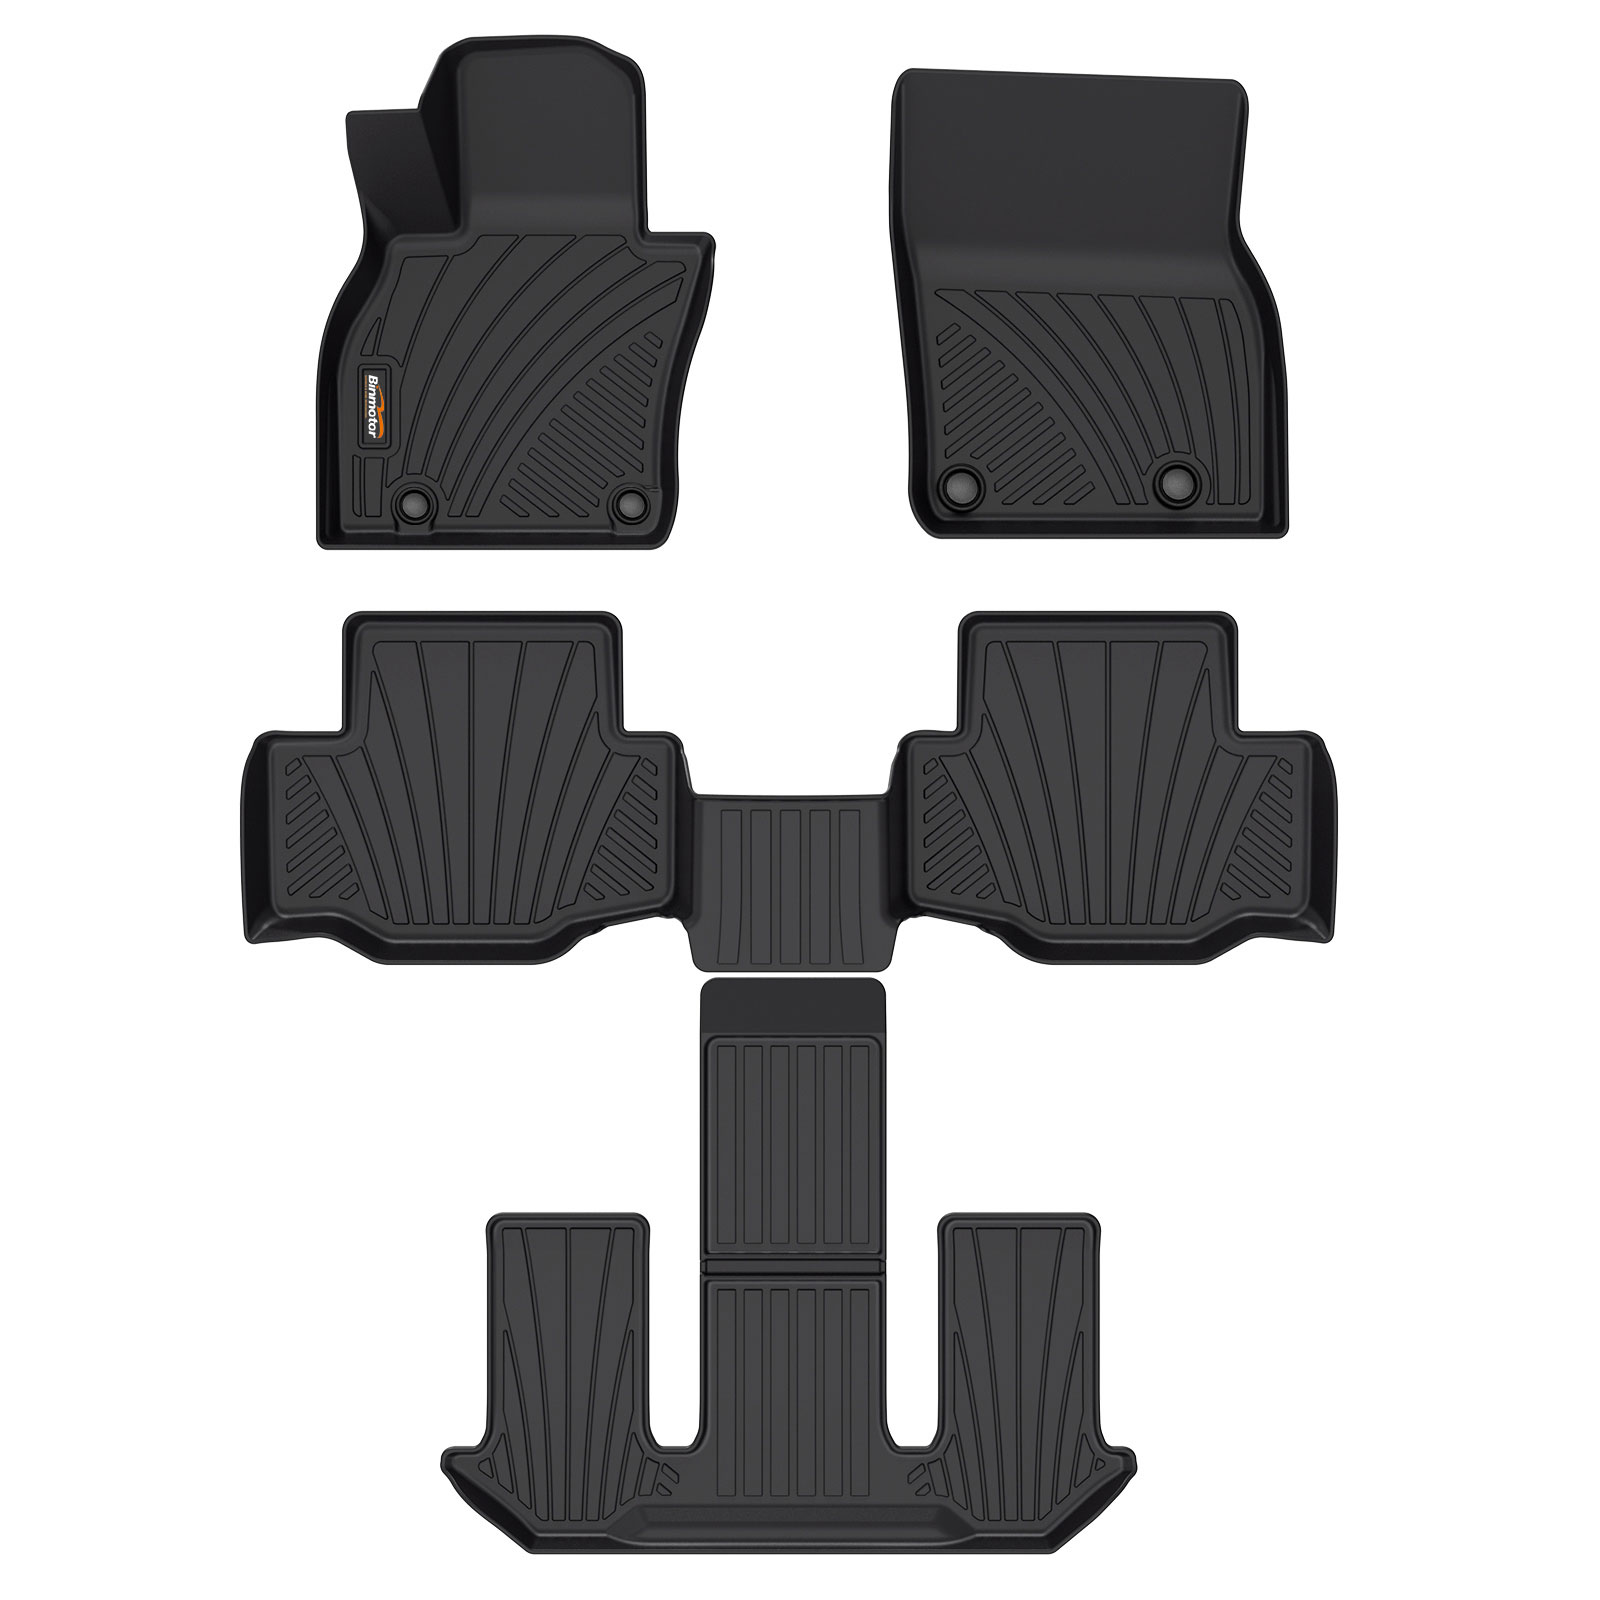 Binmotor-Floor Mats for Mazda CX-90 | cx90 PHEV (6 & 7 Seater Without 2nd Row Console), 3 Rows Full Set Car Mats TPE Material, Automotive CX 90 Accessories（compatible year 2024）